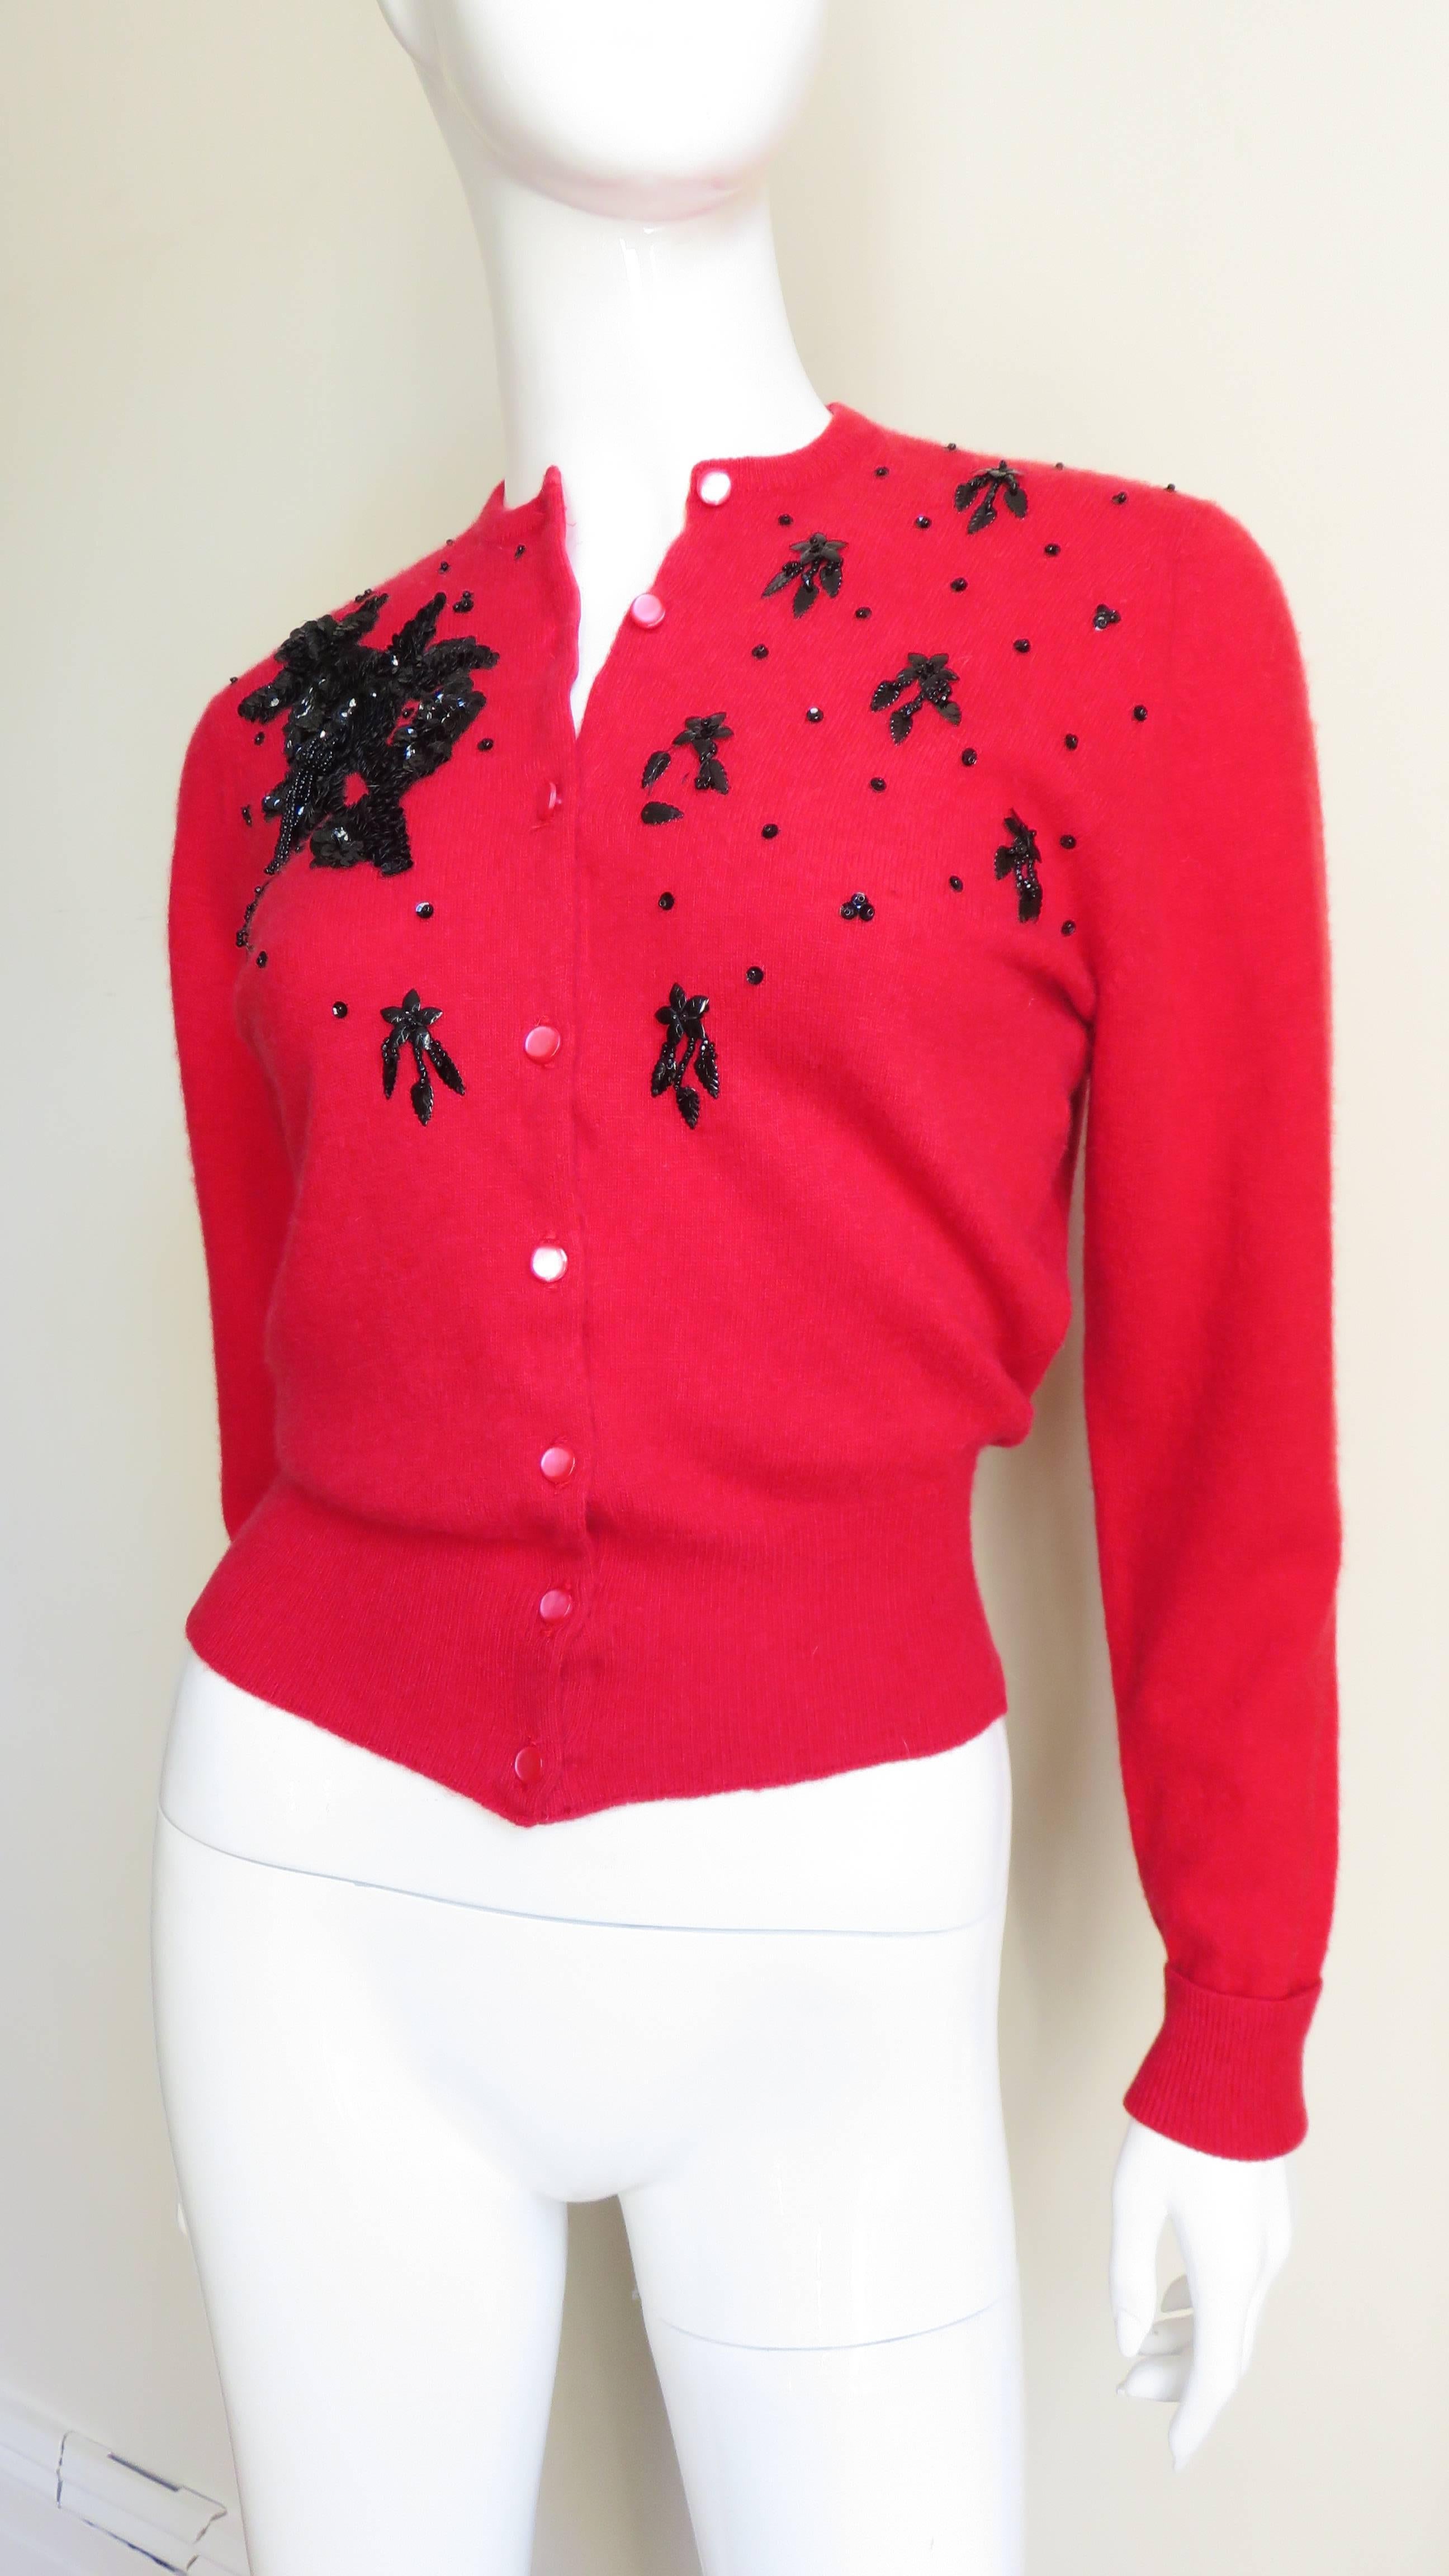 1950s Lyle & Scott Beaded Cashmere Cardigan Sweater In Good Condition For Sale In Water Mill, NY